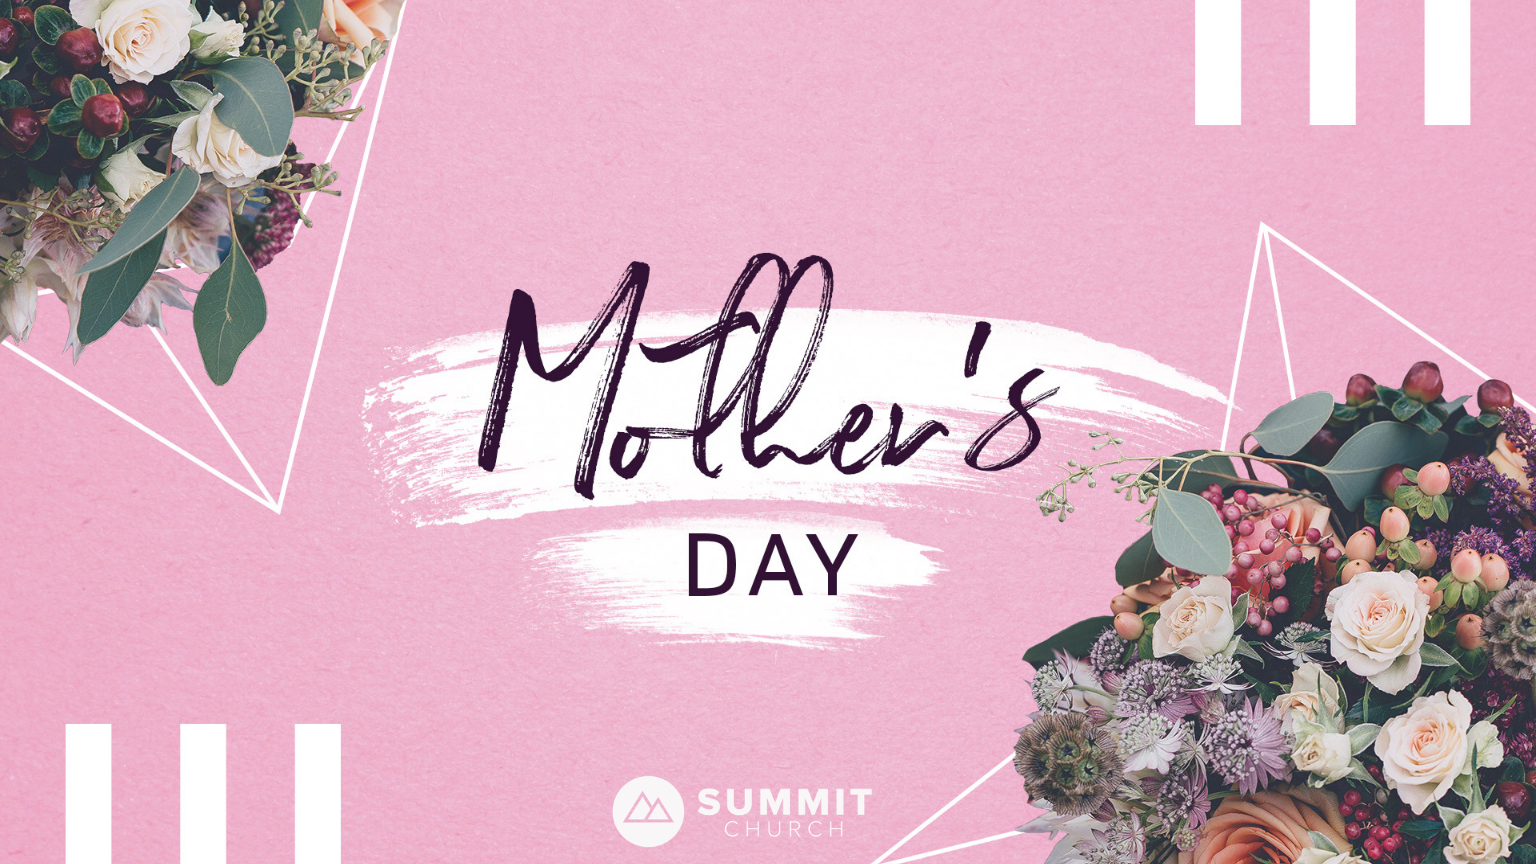 Honor Week 2: Mother's Day 2019